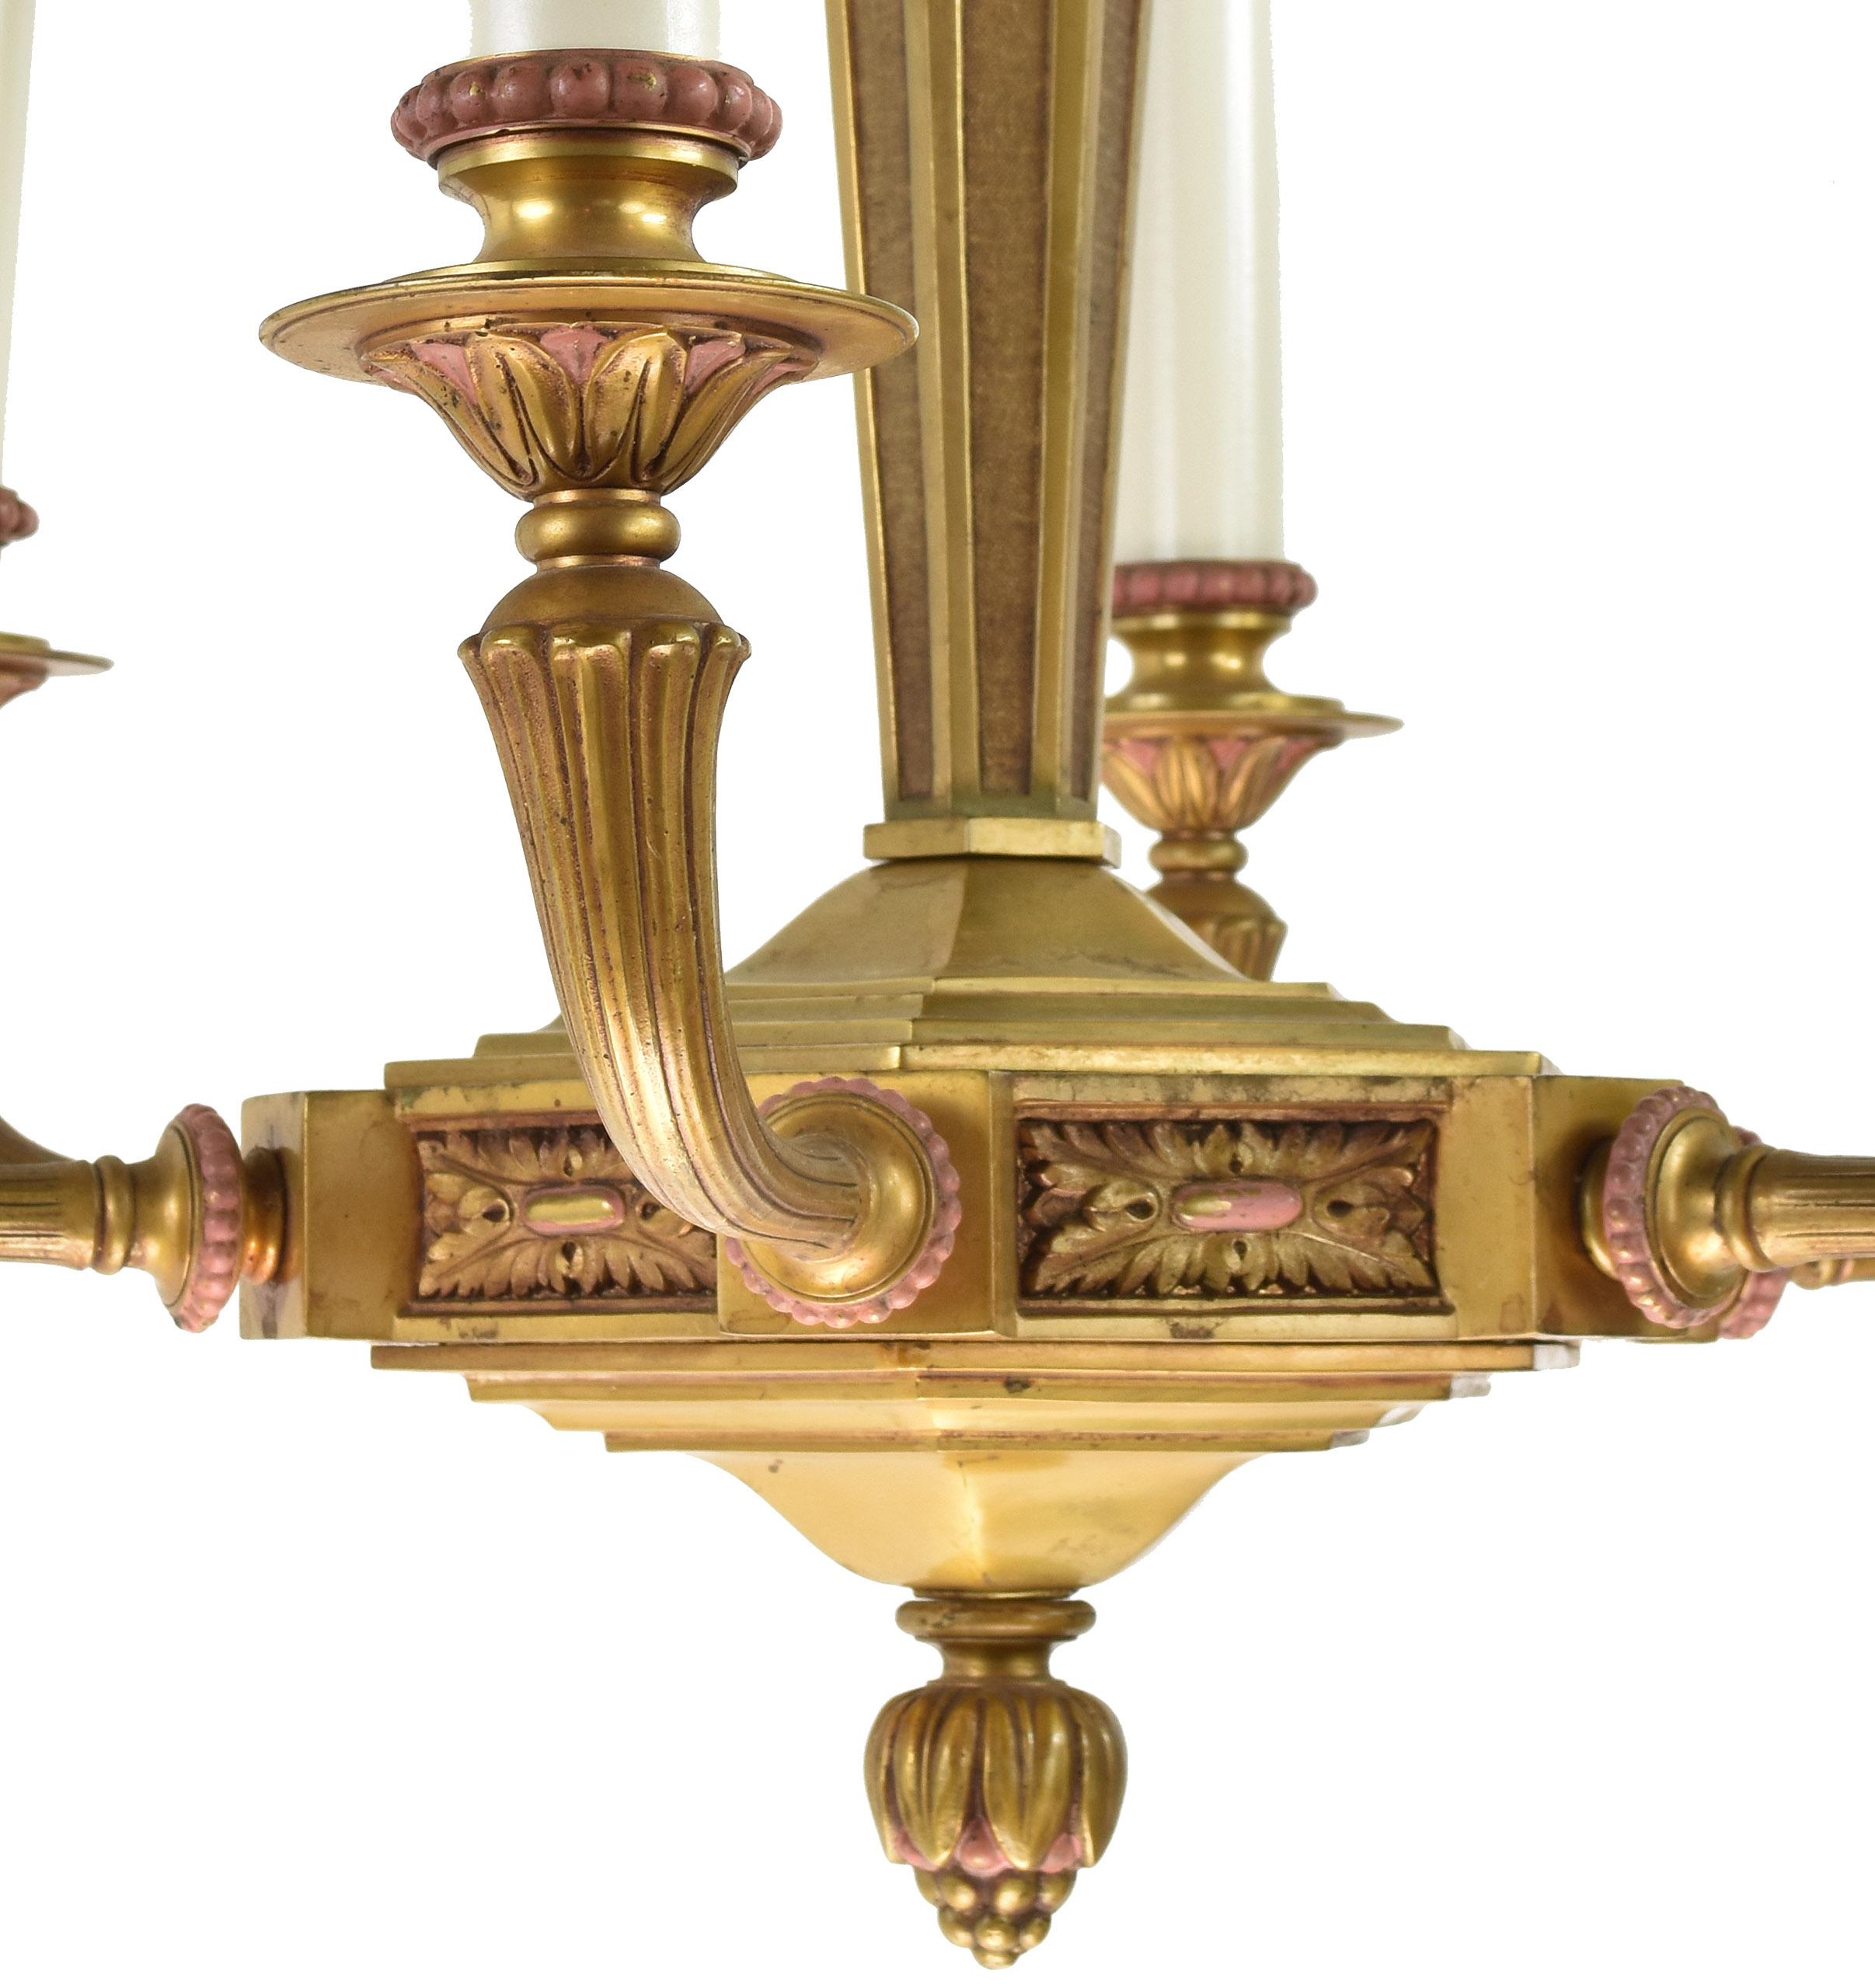 Elegant six candle cast brass chandelier with sweeping arms and leafy details throughout the fixture’s body. Subtle, soft pink accents meld seamlessly with the warm brass, creating a rich blanket of color,

circa 1920.
Condition: Very good 
Finish: